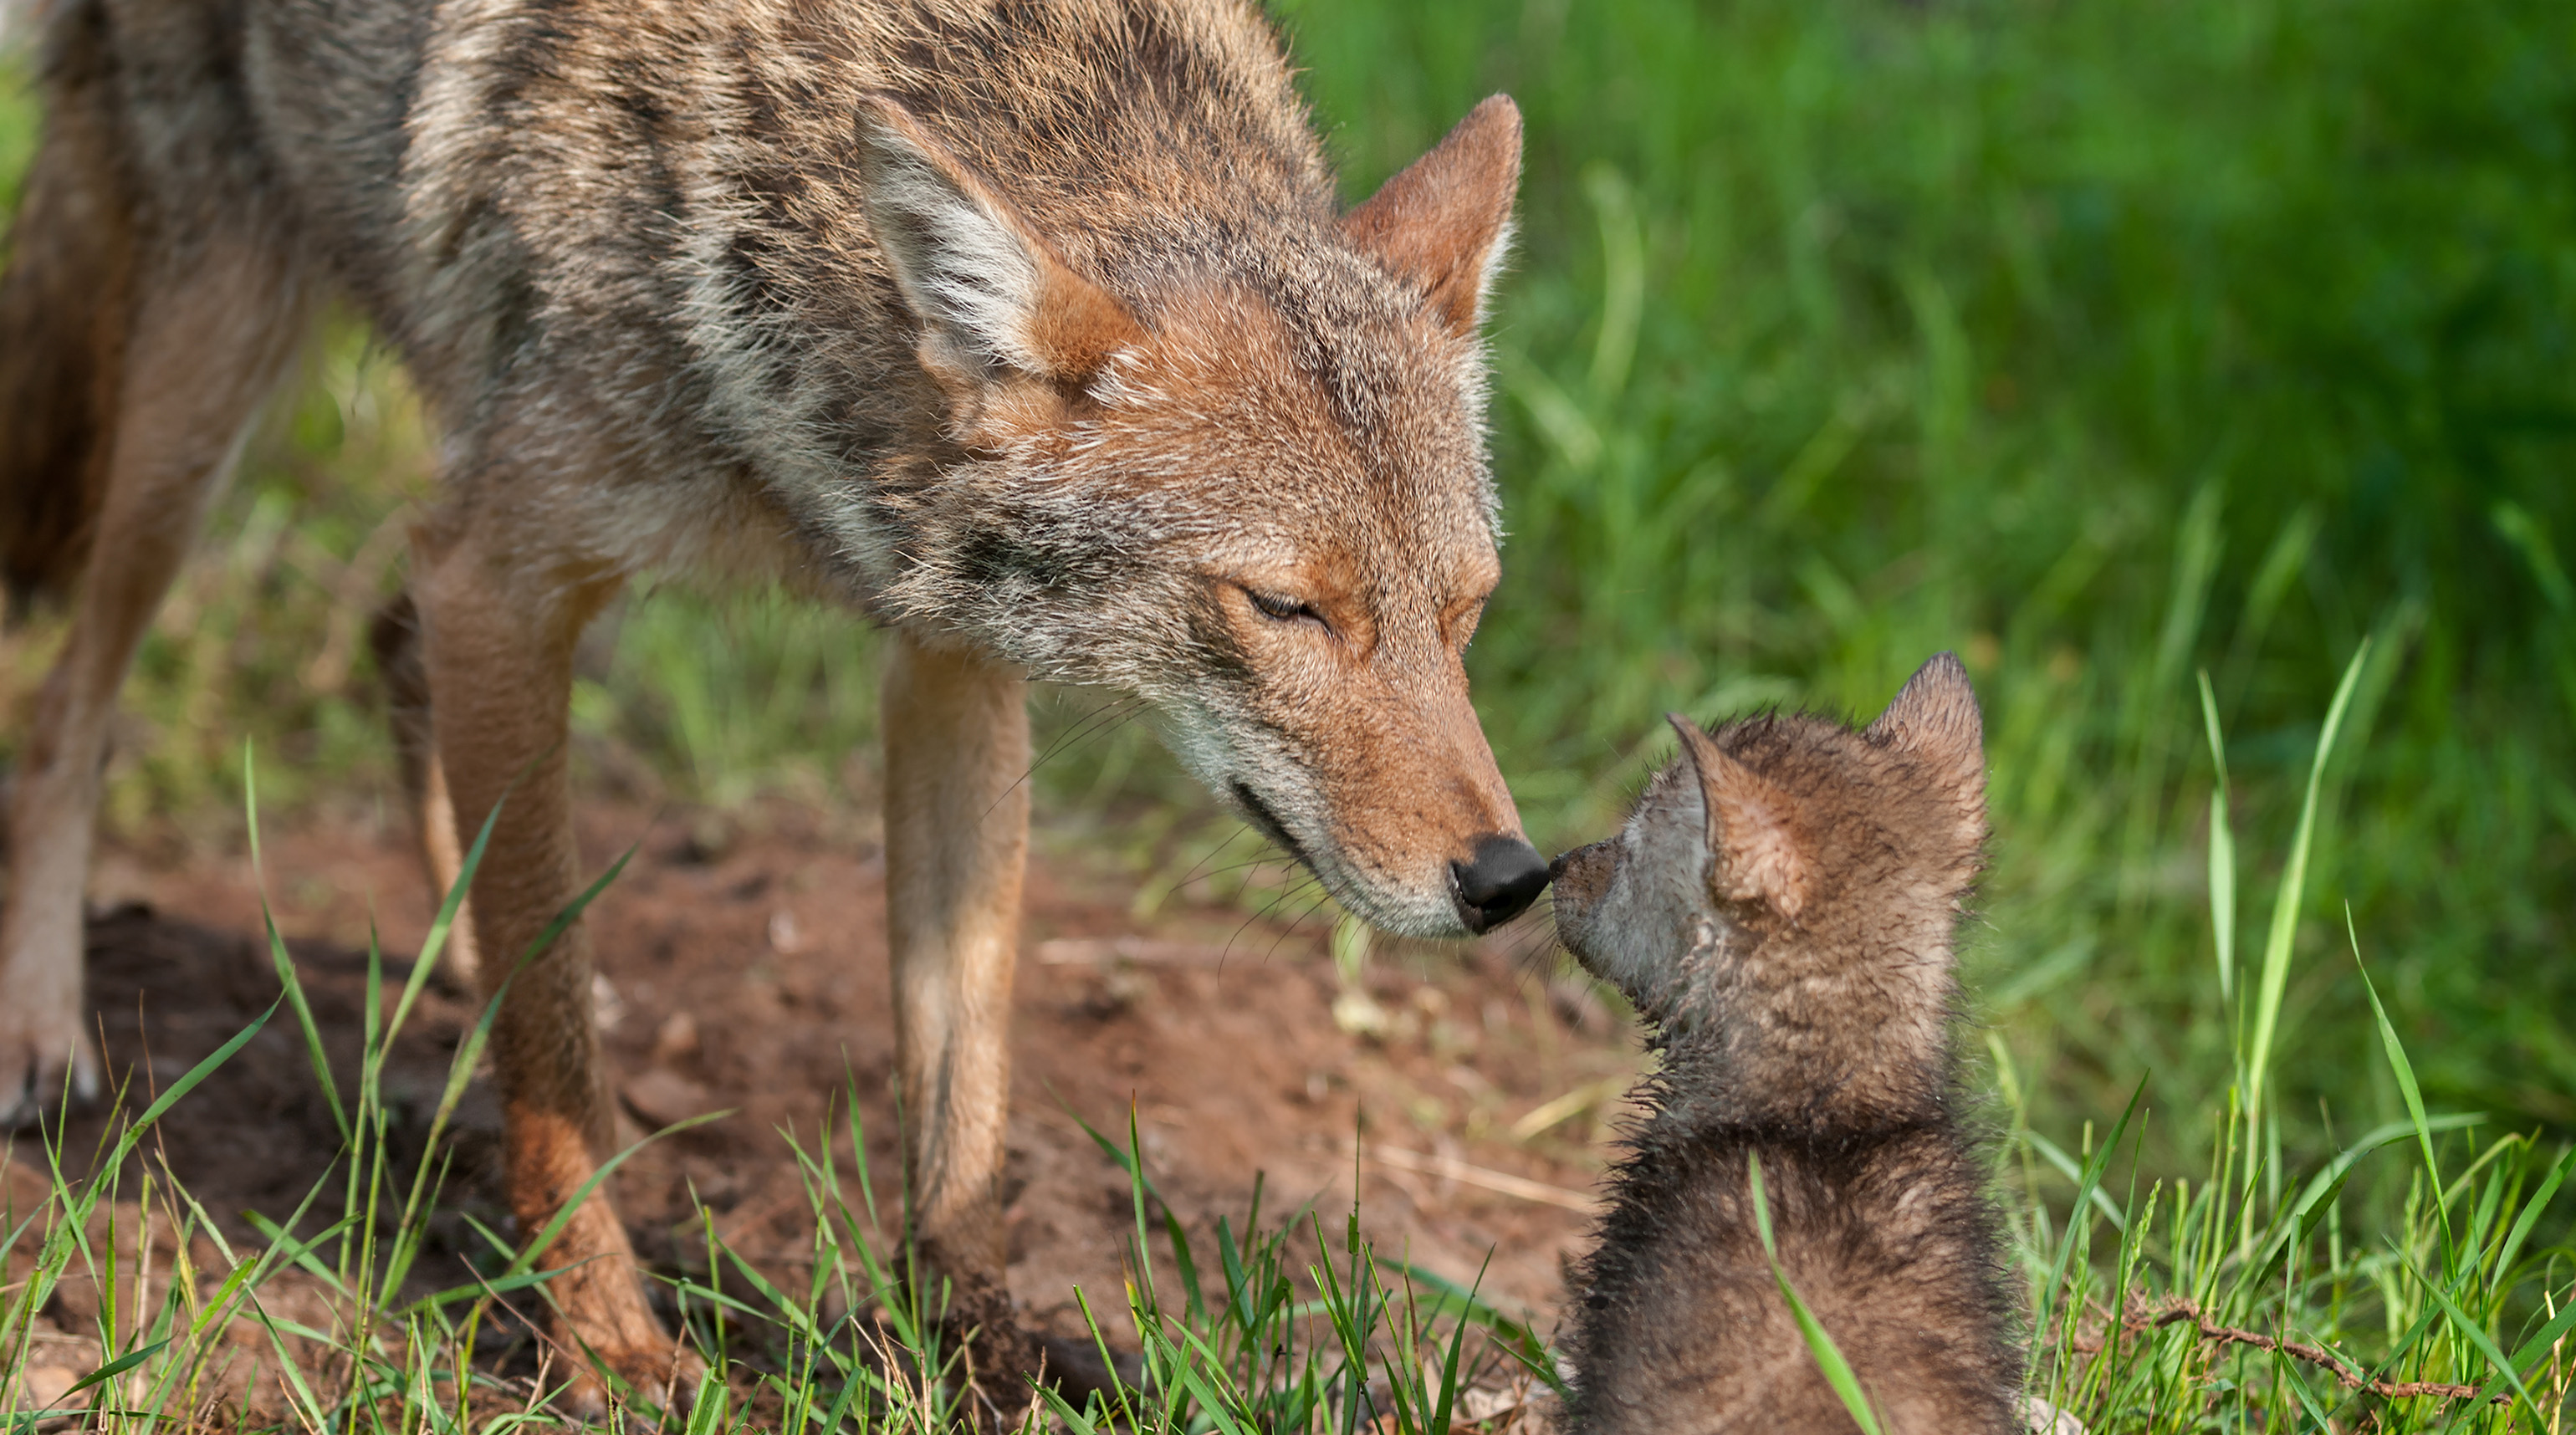 A coyote touching noses with its pup.